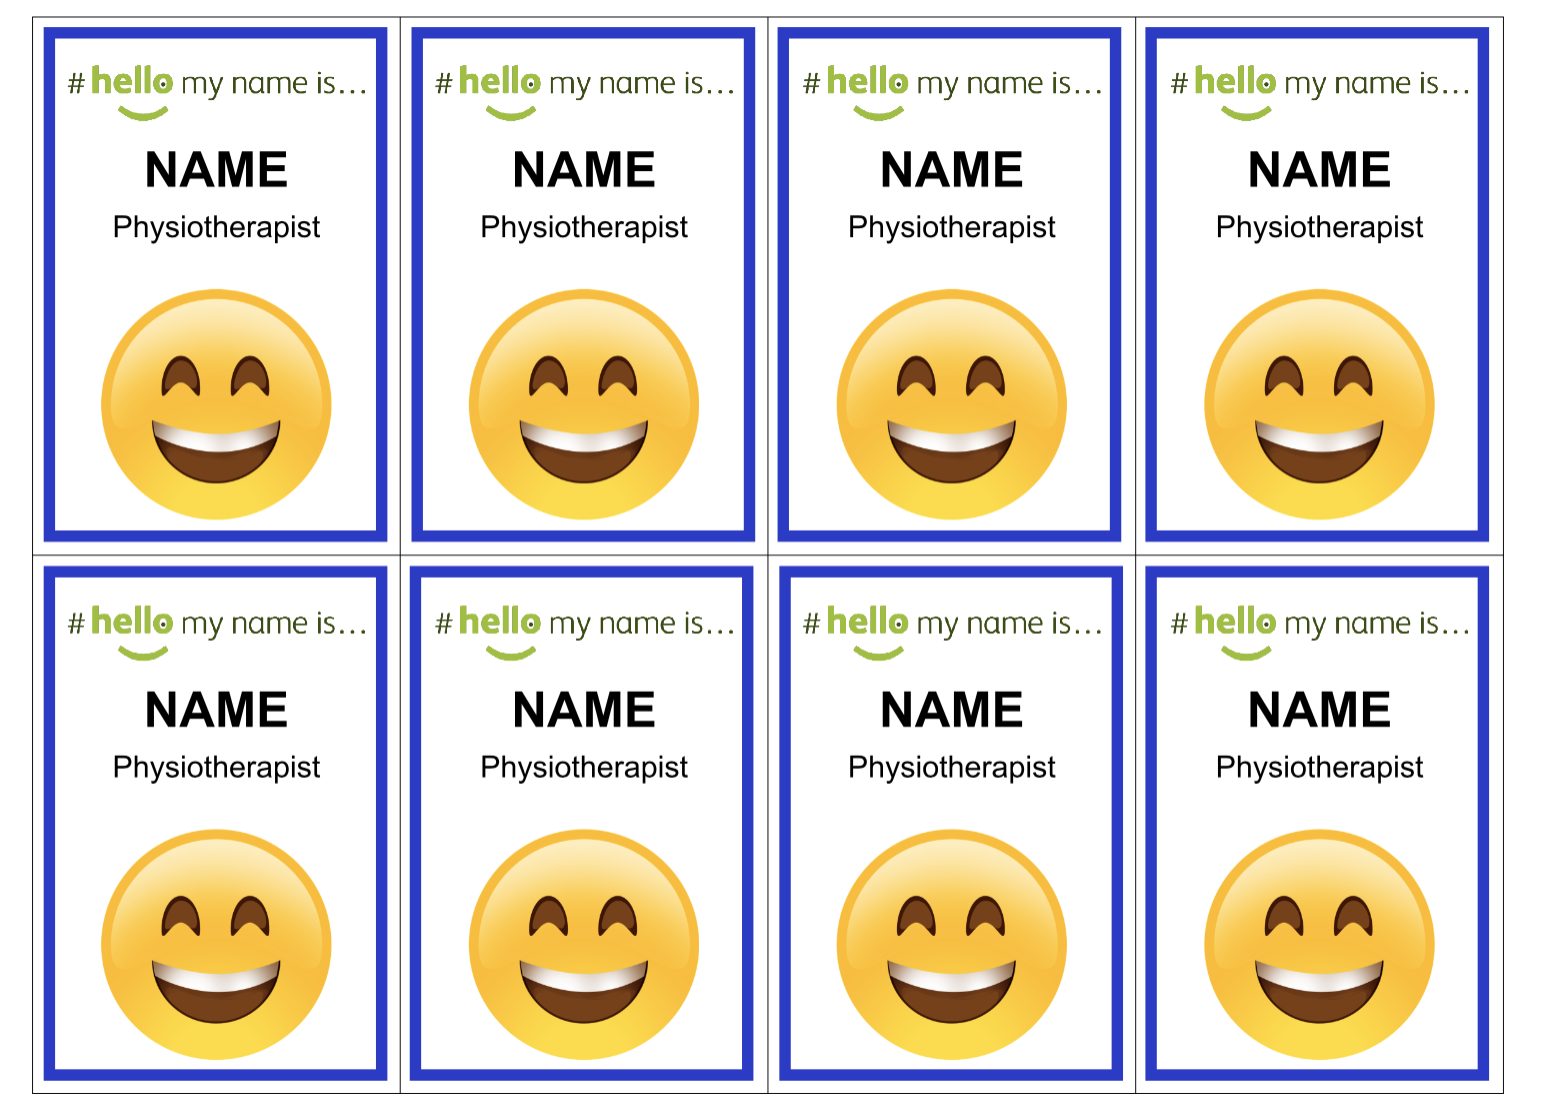 Hellomynameis stickers for those staff wearing PPE featured image